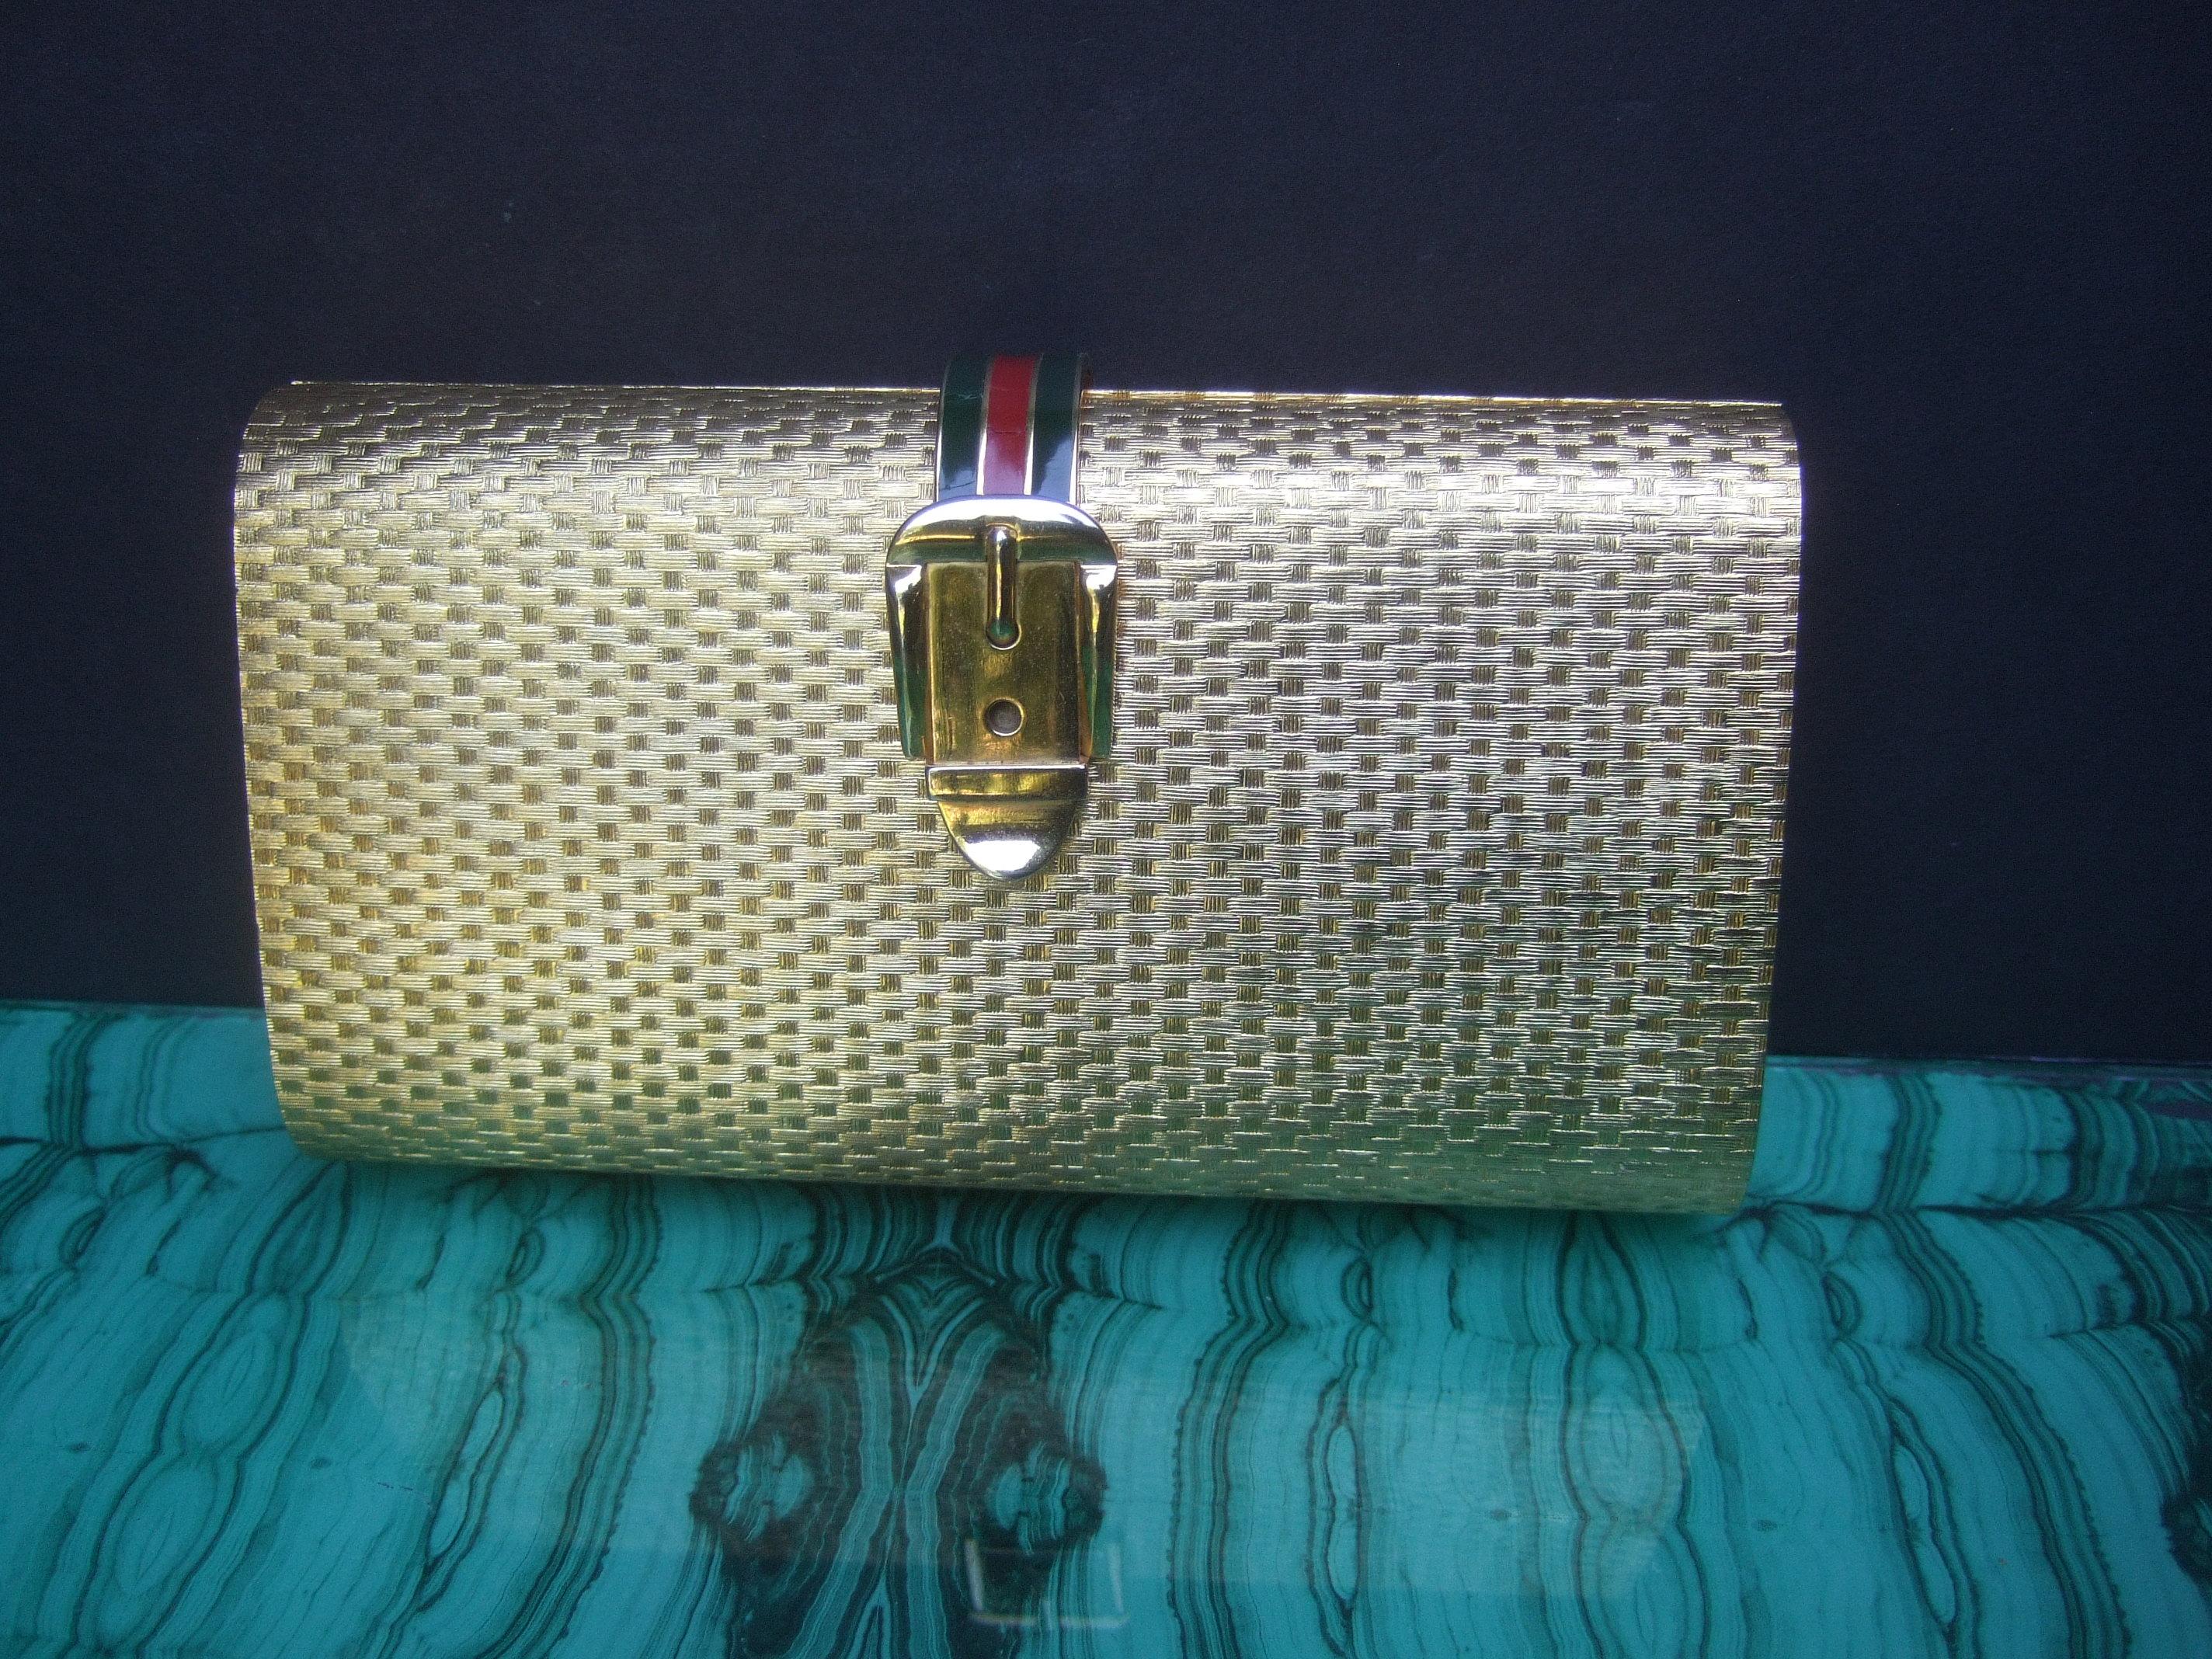 Gucci Italy Rare gilt metal minaudiere' clutch bag c 1970s
The opulent gold metal clutch is designed with a contiguous textured geometric basket weave pattern throughout the exterior

Adorned with a gilt metal buckle clasp emblem; accented with